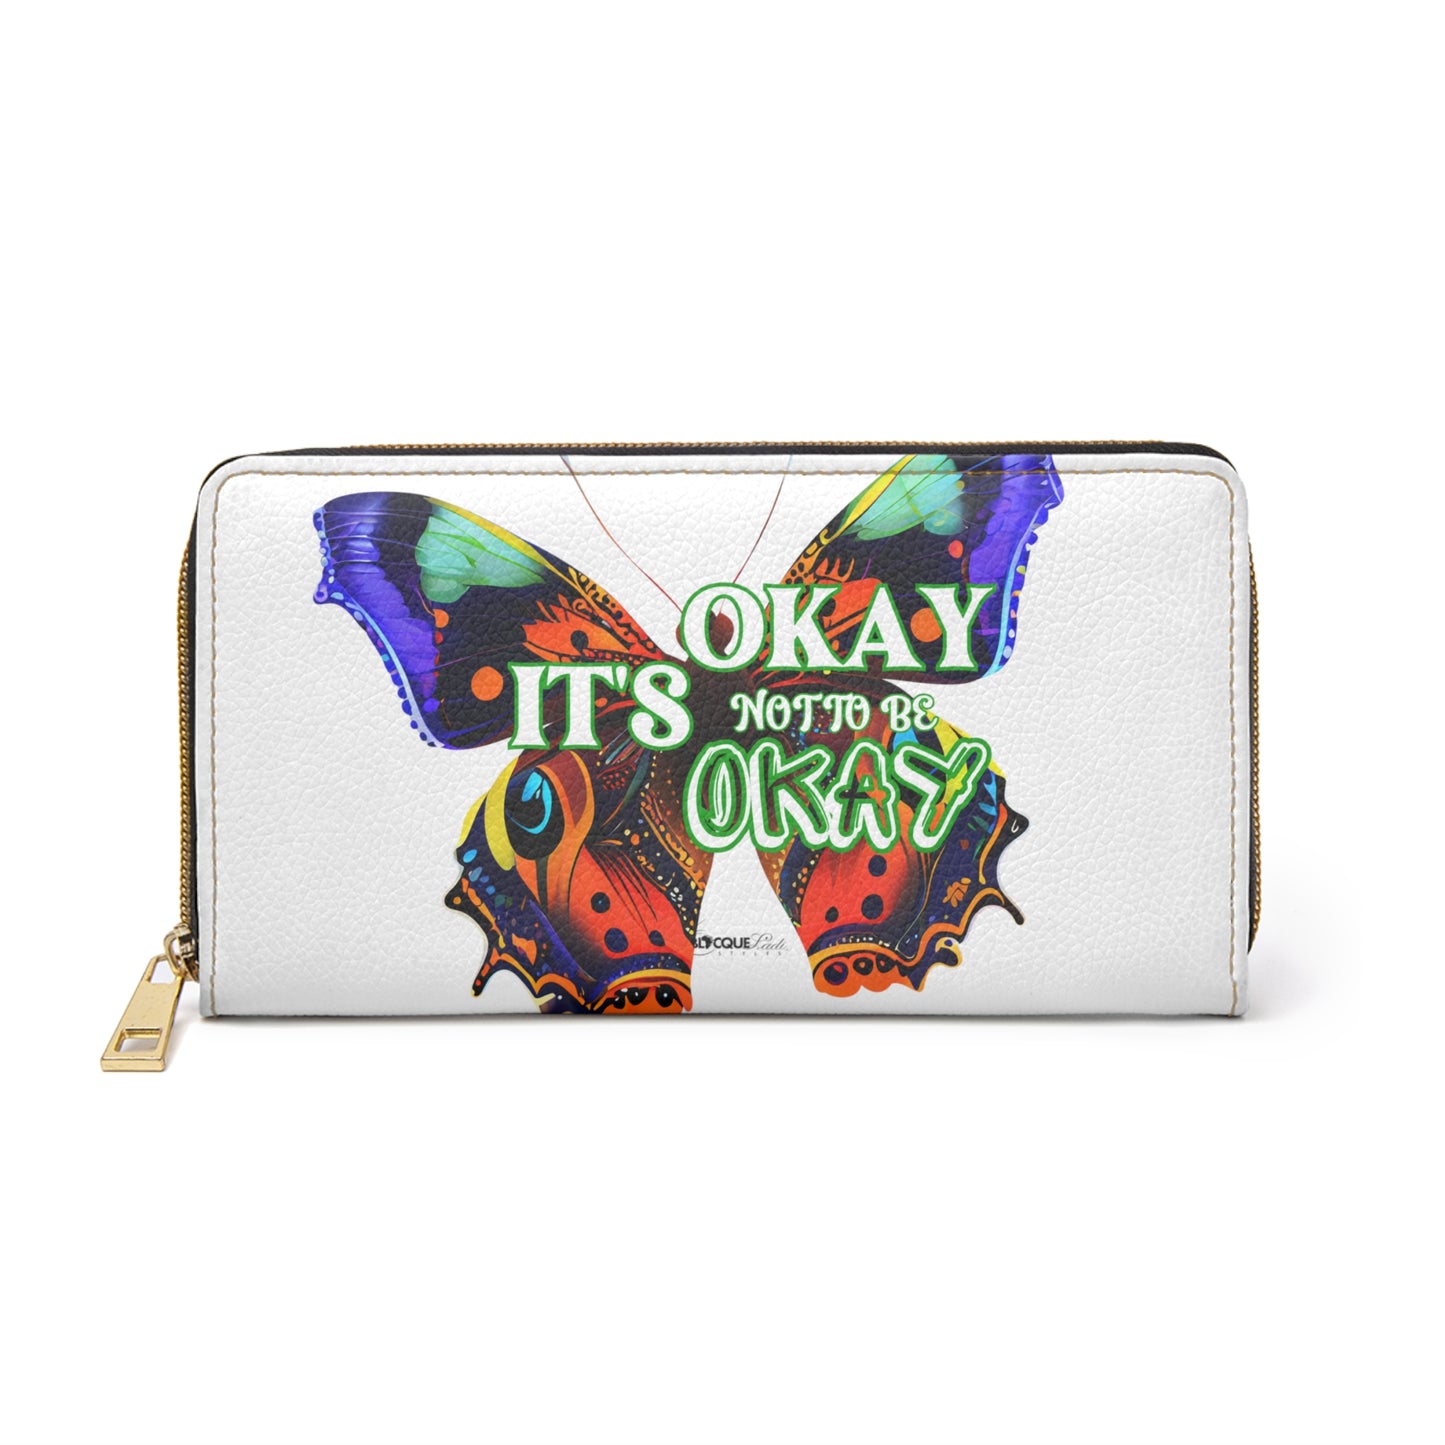 IT’S OKAY, NOT TO BE OKAY- Positive Afrocentric Affirmation Vegan Leather Wallet Bag- Empower Your Style and Self-Love ; Black Wallet